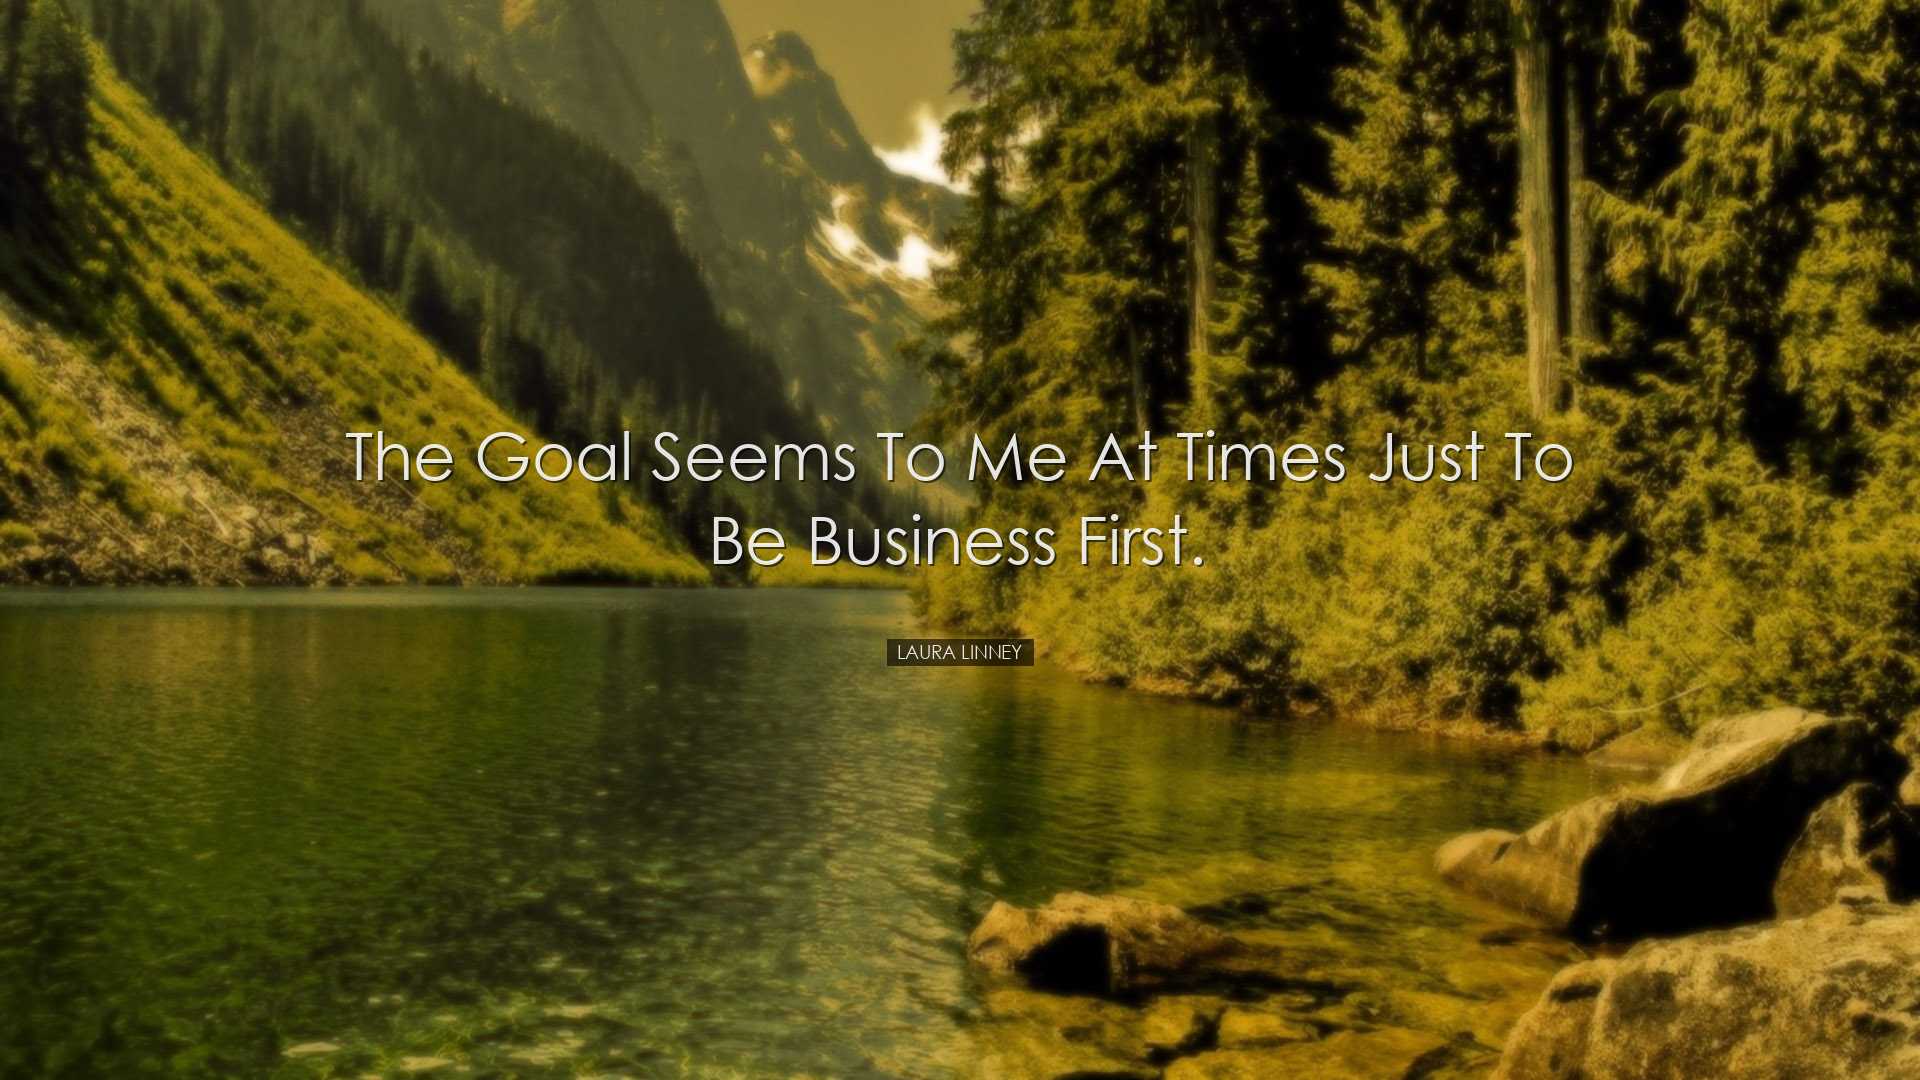 The goal seems to me at times just to be business first. - Laura L